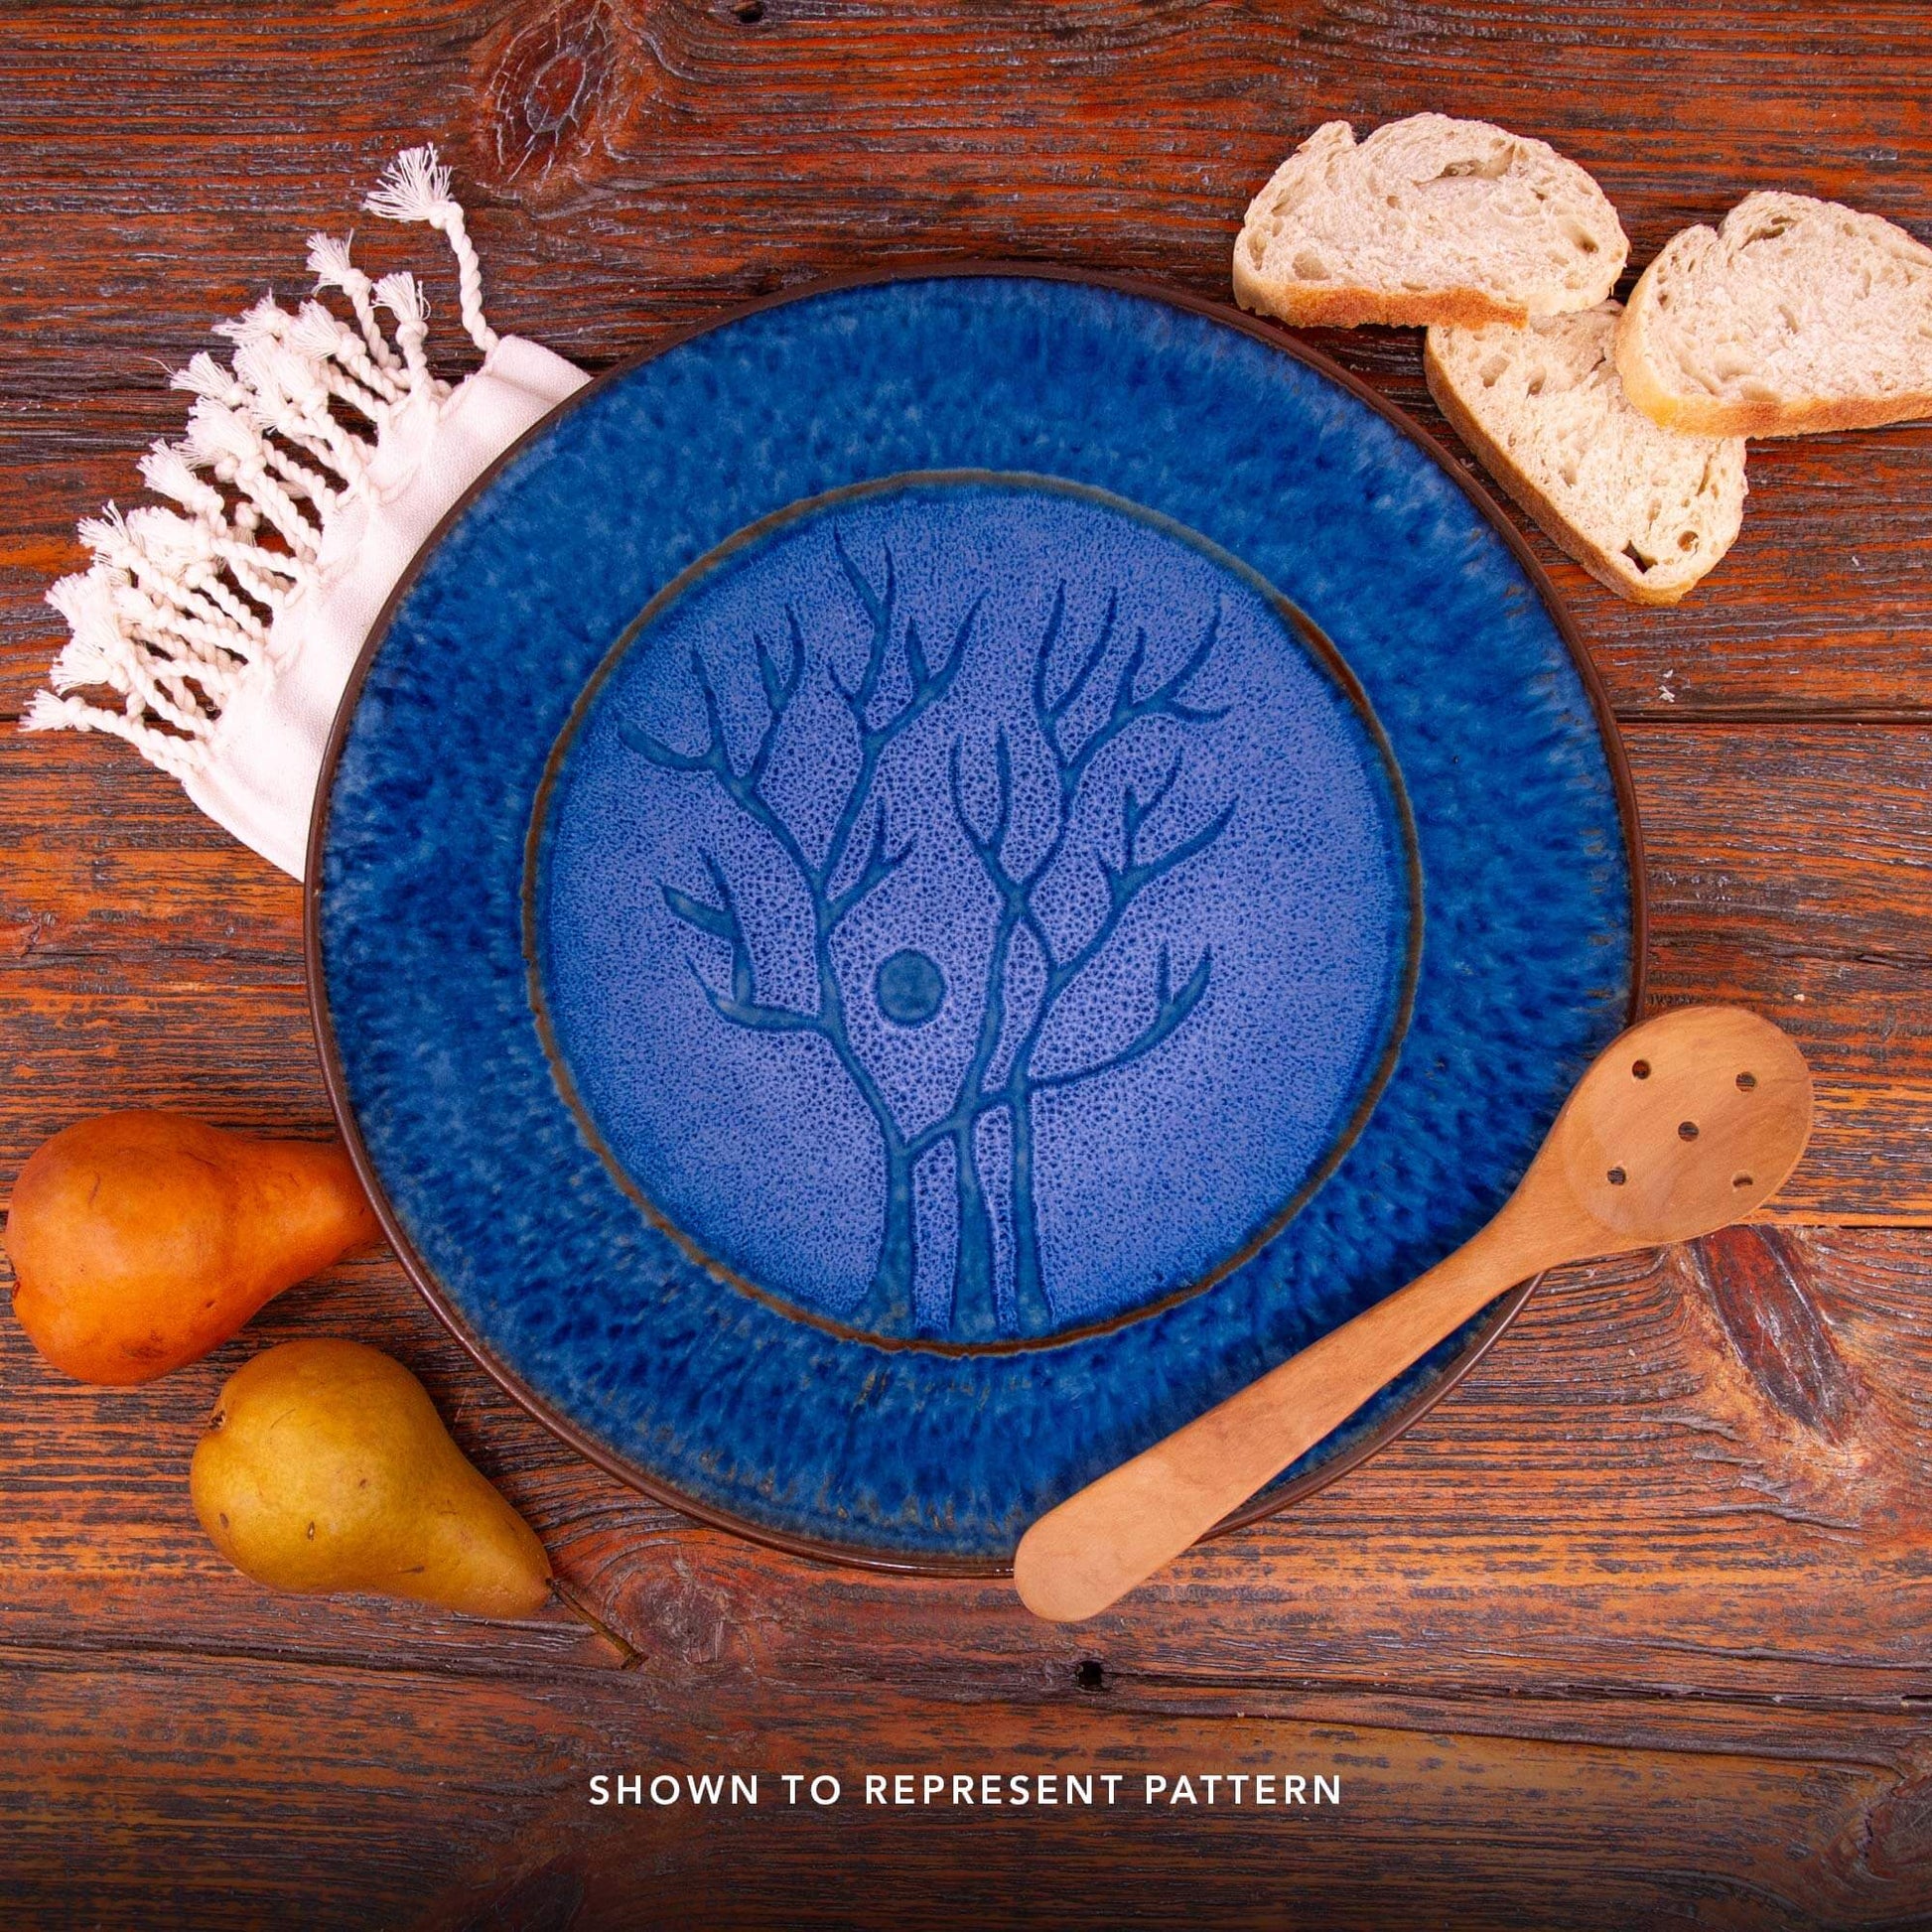 Handmade Pottery Oval Tray in Blue Tree pattern made by Georgetown Pottery in Maine